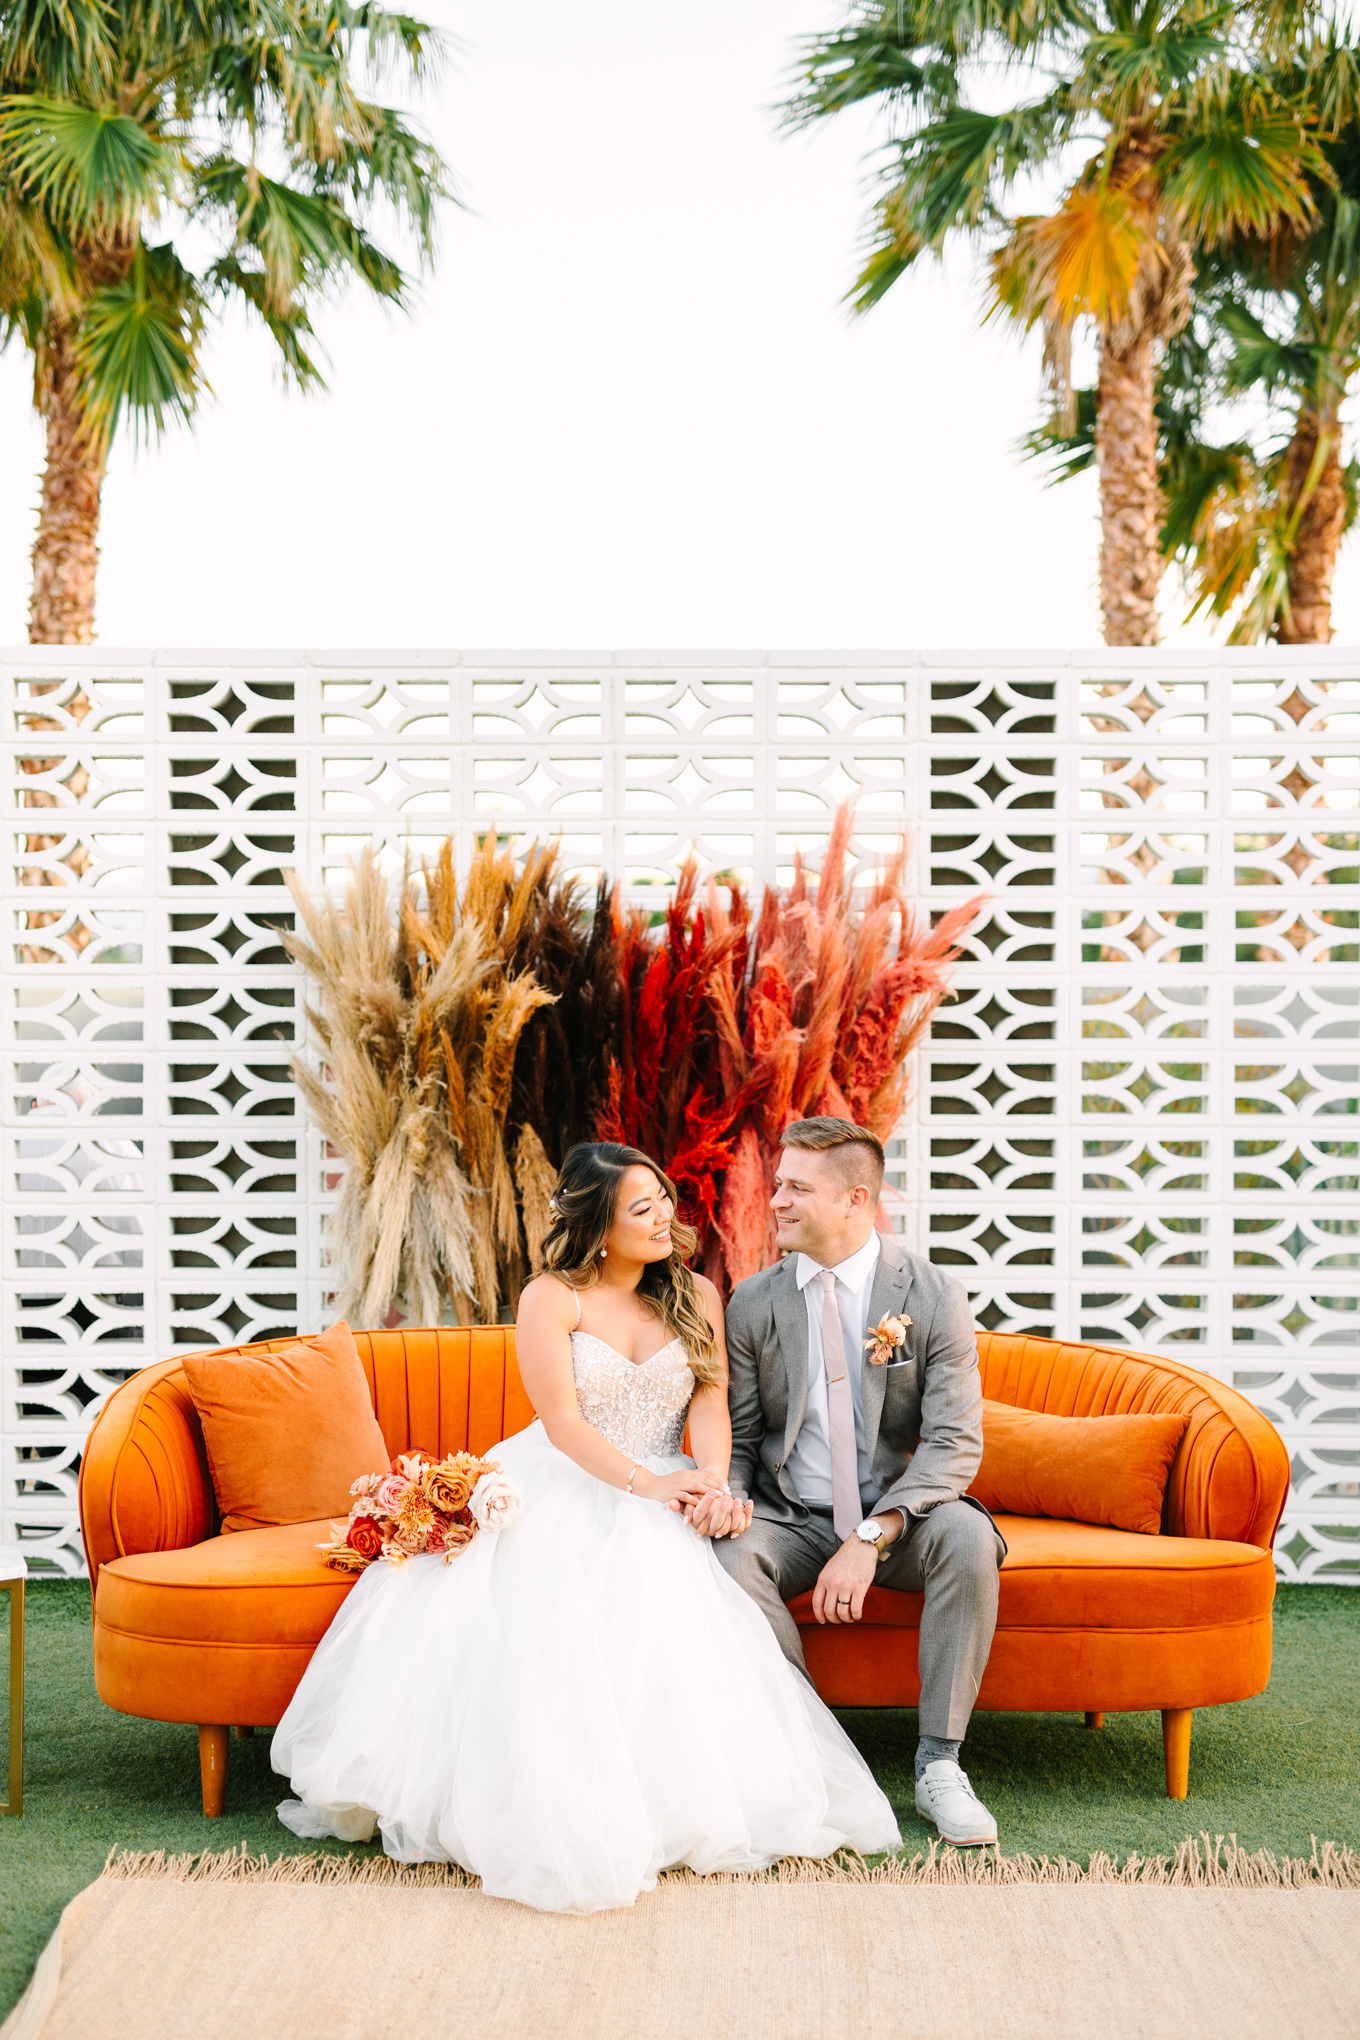 Bride and groom on orange velvet couch | Pink and orange Lautner Compound wedding | Colorful Palm Springs wedding photography | #palmspringsphotographer #palmspringswedding #lautnercompound #southerncaliforniawedding  Source: Mary Costa Photography | Los Angeles